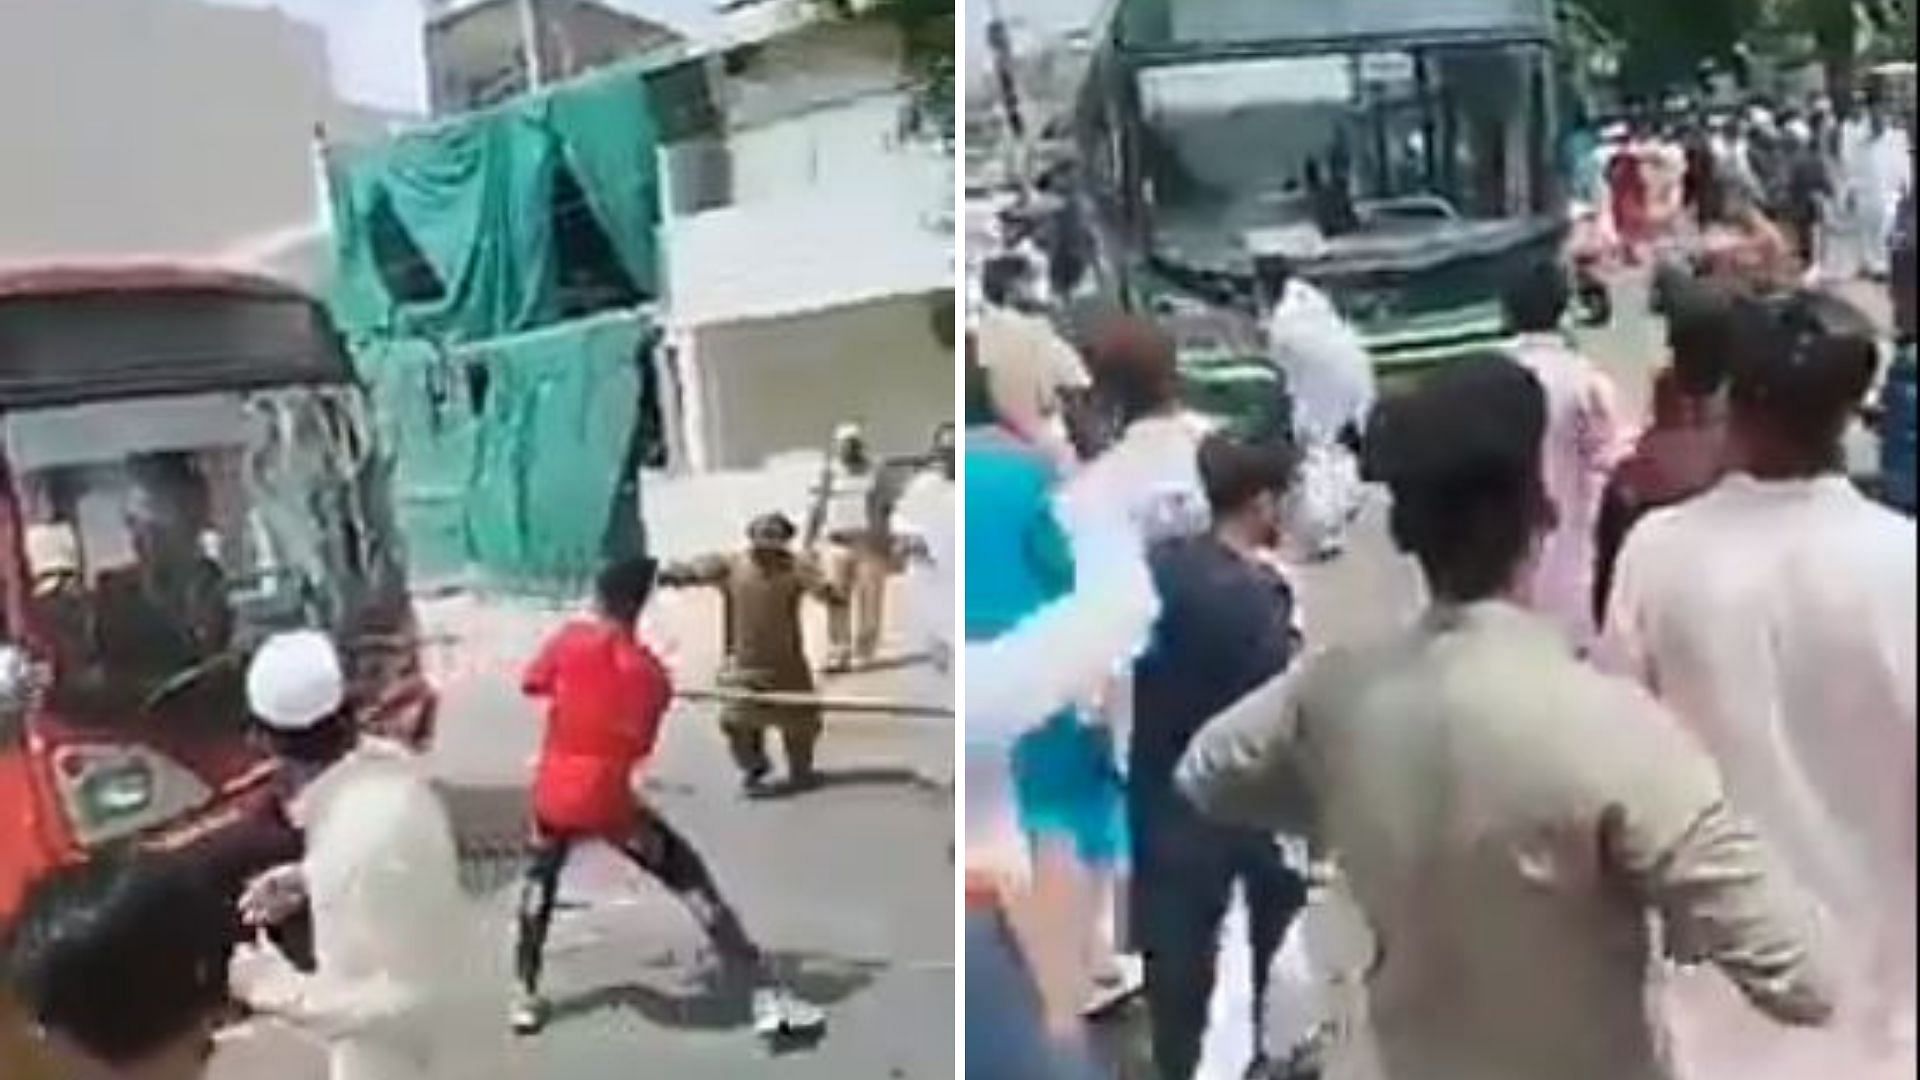 The crowd took to the streets after a speeding car plowed through a congested street, where two worshippers from two mosques had dispersed after Eid prayers on 5 June.